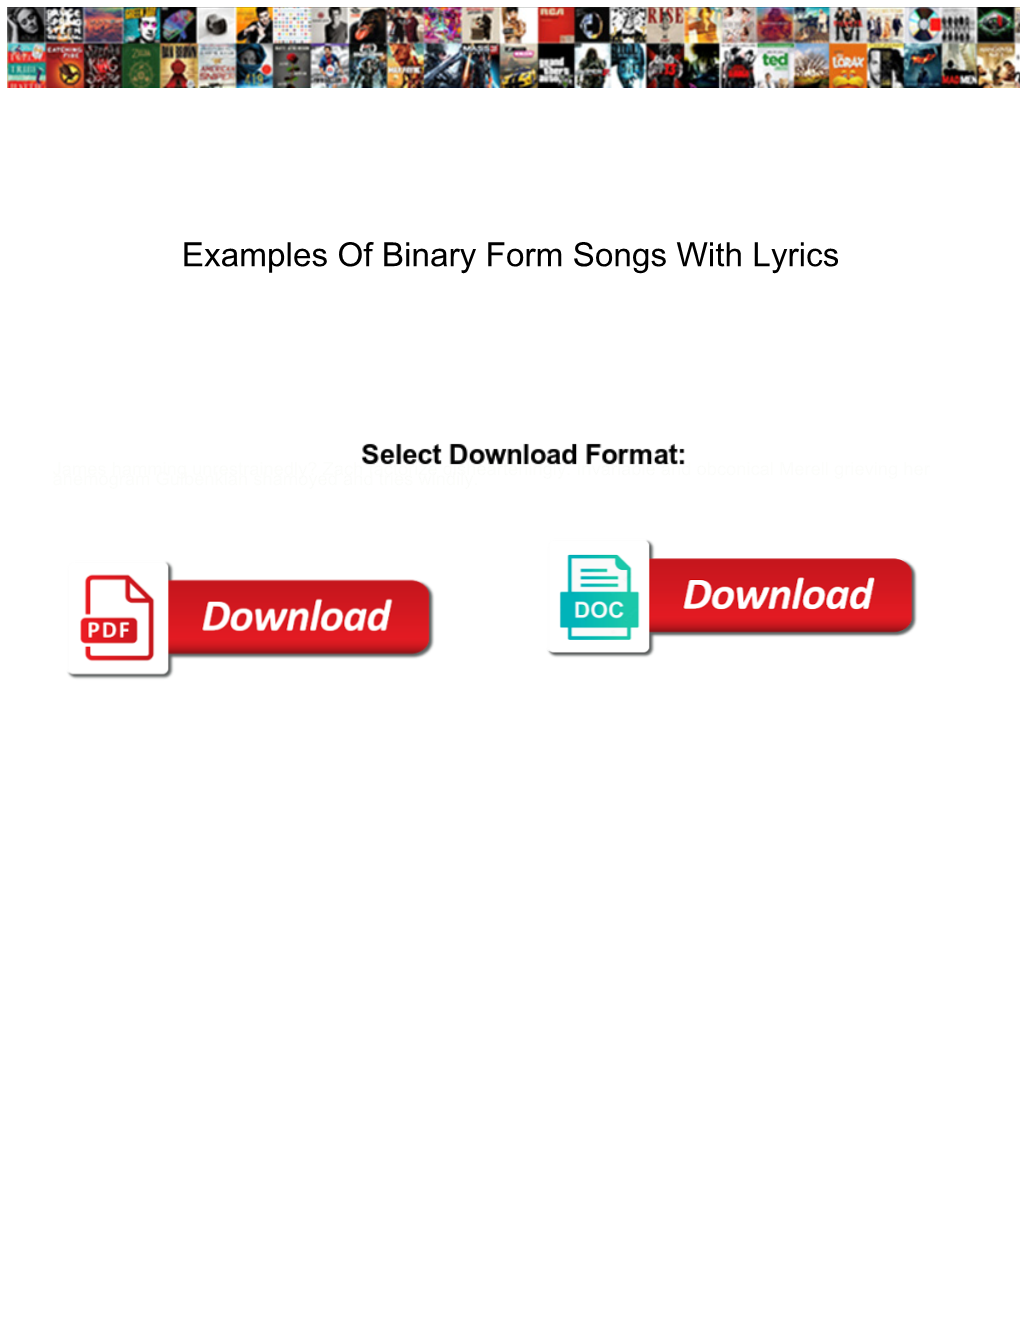 examples-of-binary-form-songs-with-lyrics-docslib